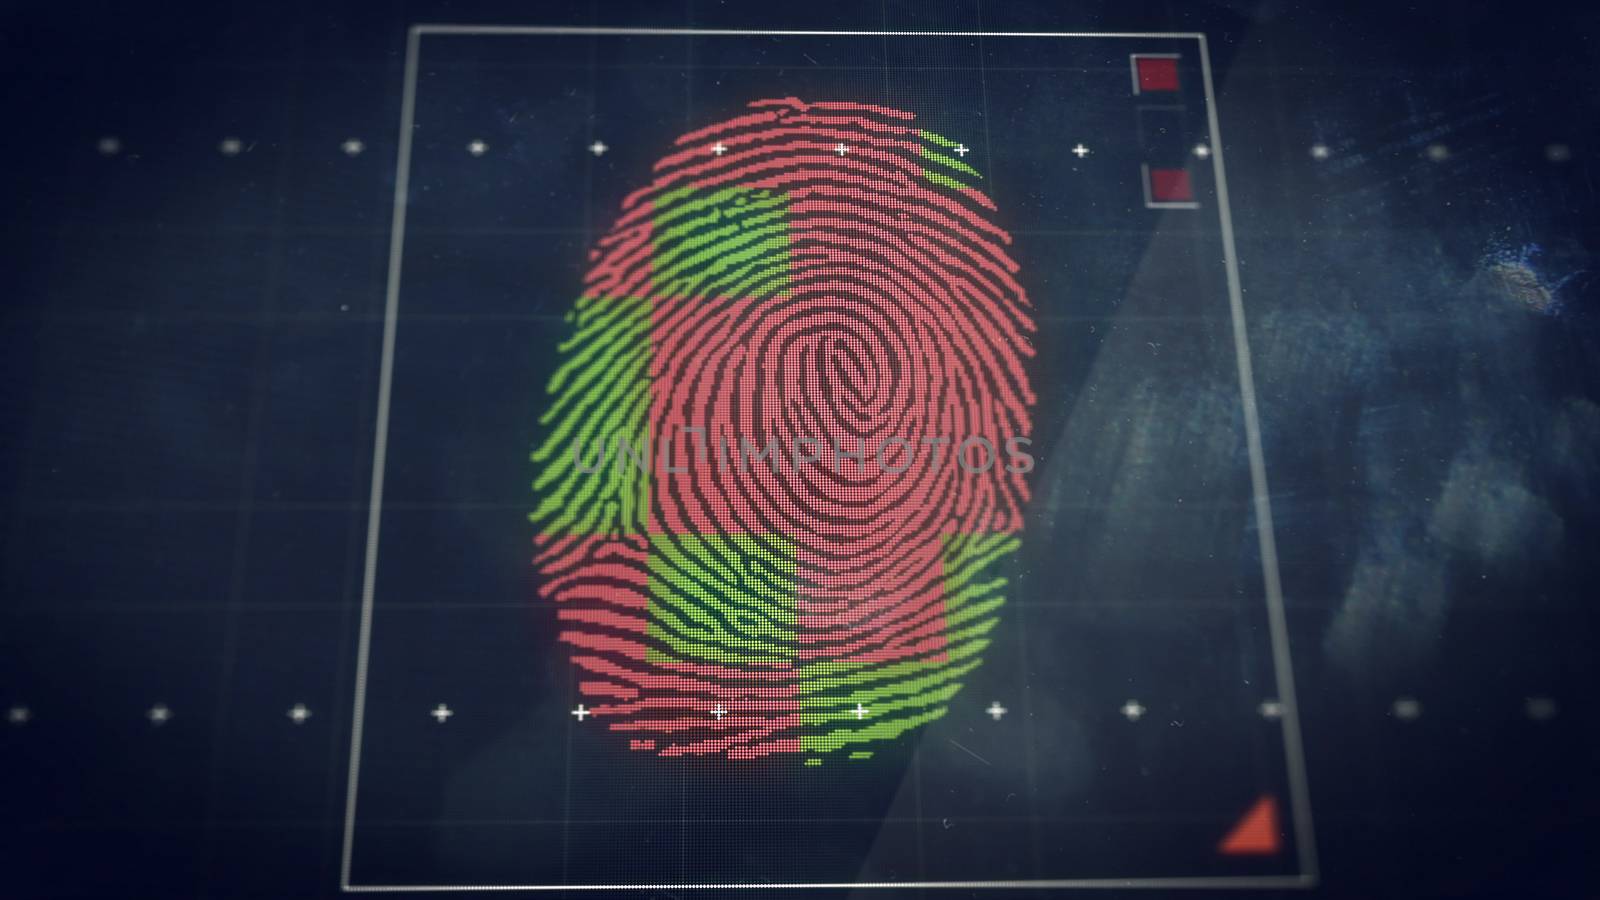 Abstract technology background. Security system concept with fingerprint scanning. by klss